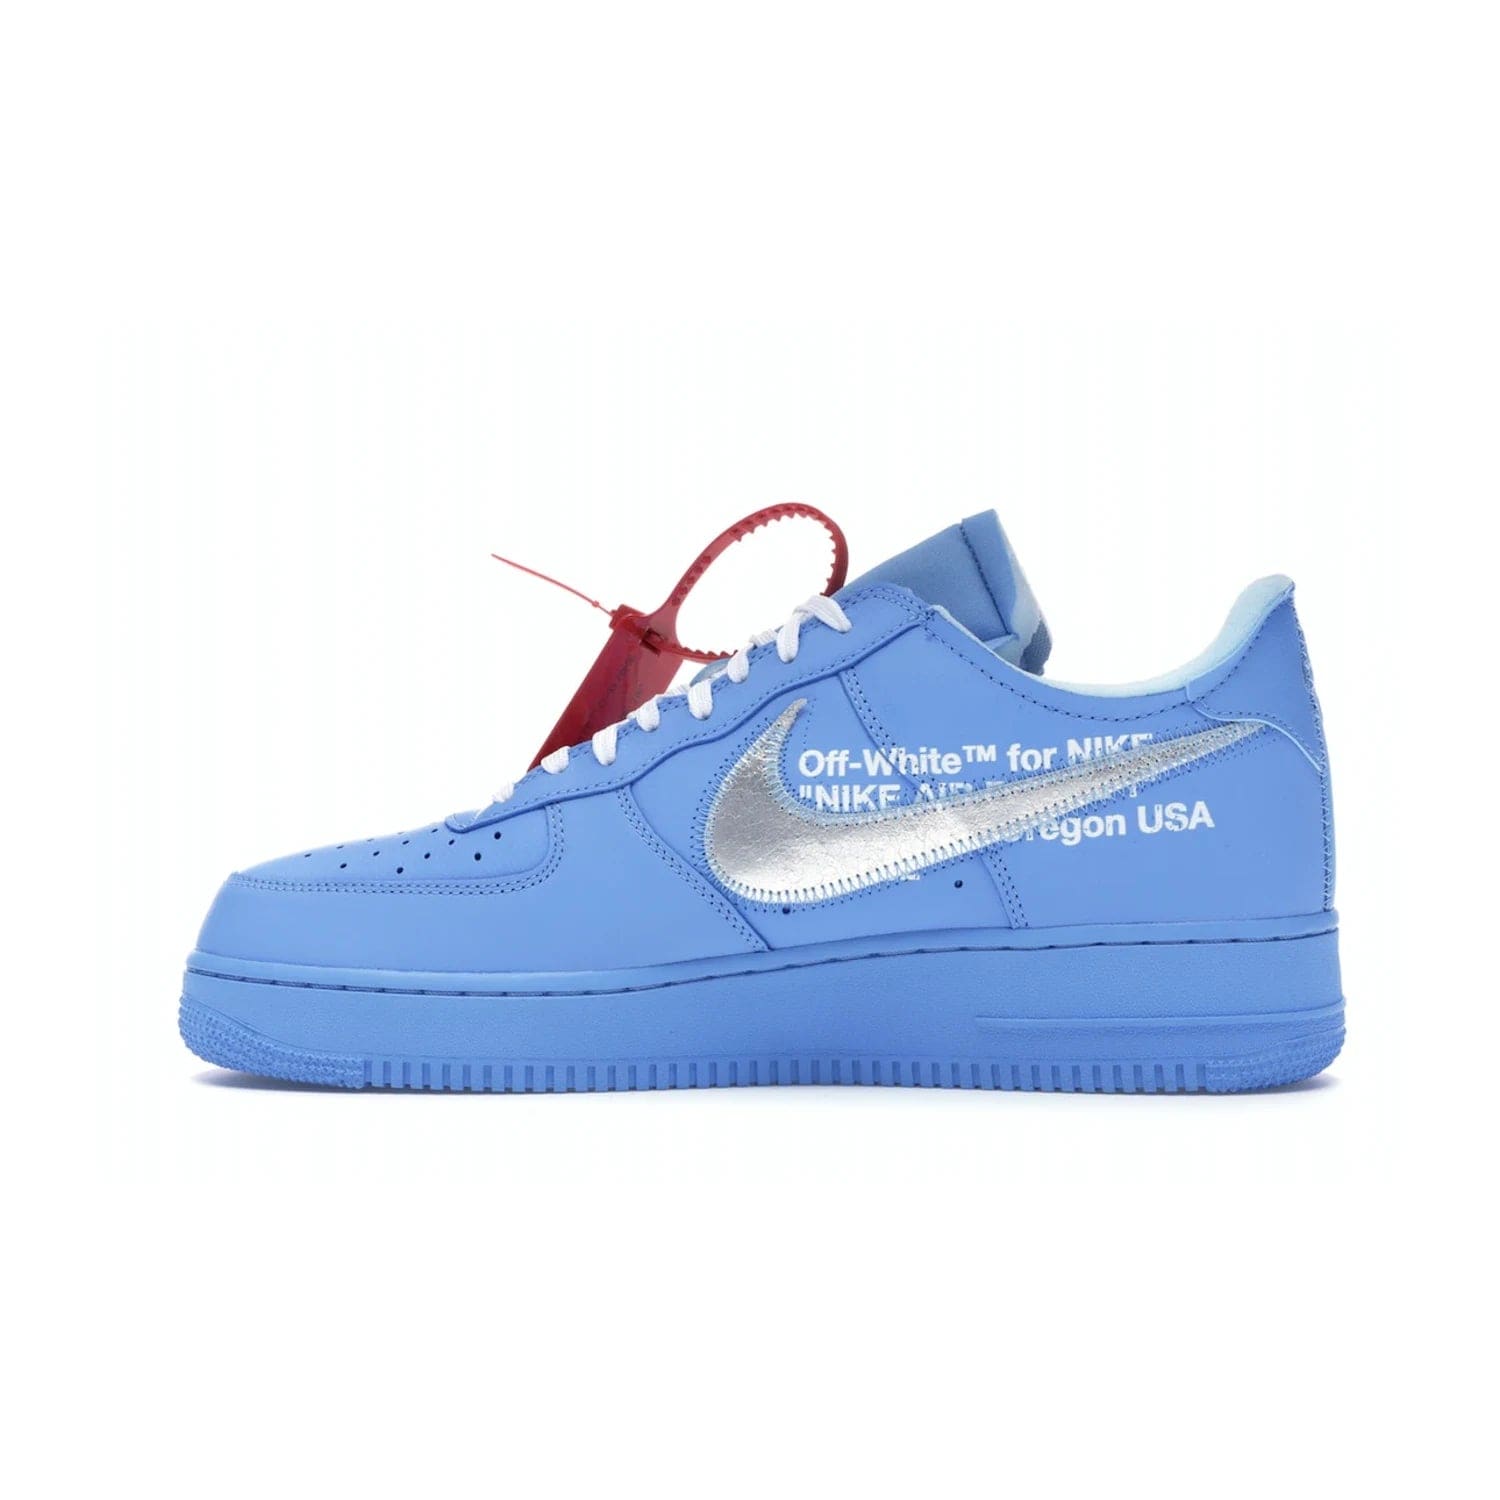 Nike Air Force 1 Low Off-White MCA University Blue - Image 20 - Only at www.BallersClubKickz.com - Virgil Abloh's Air Force 1 Low Off-White MCA University Blue: Features University Blue leather and midsole, reflective silver Nike Swoosh, red zip tie, white laces, and iconic Off-White™ branding. A must-have for any Virgil Abloh enthusiast.